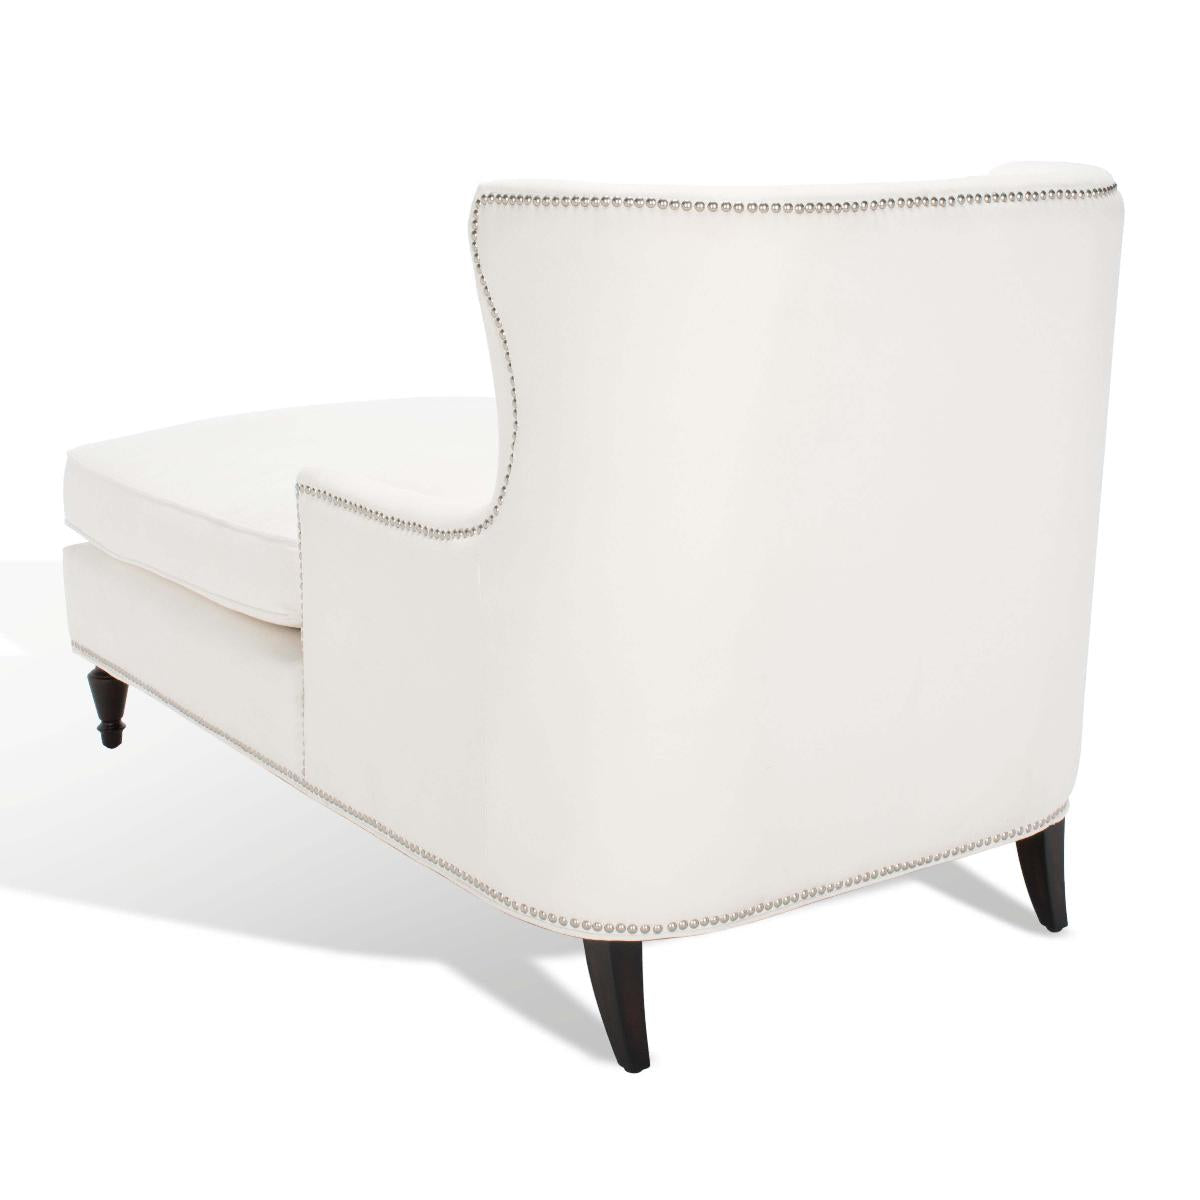 Safavieh Couture Jamie Upholstered Chaise Lounge